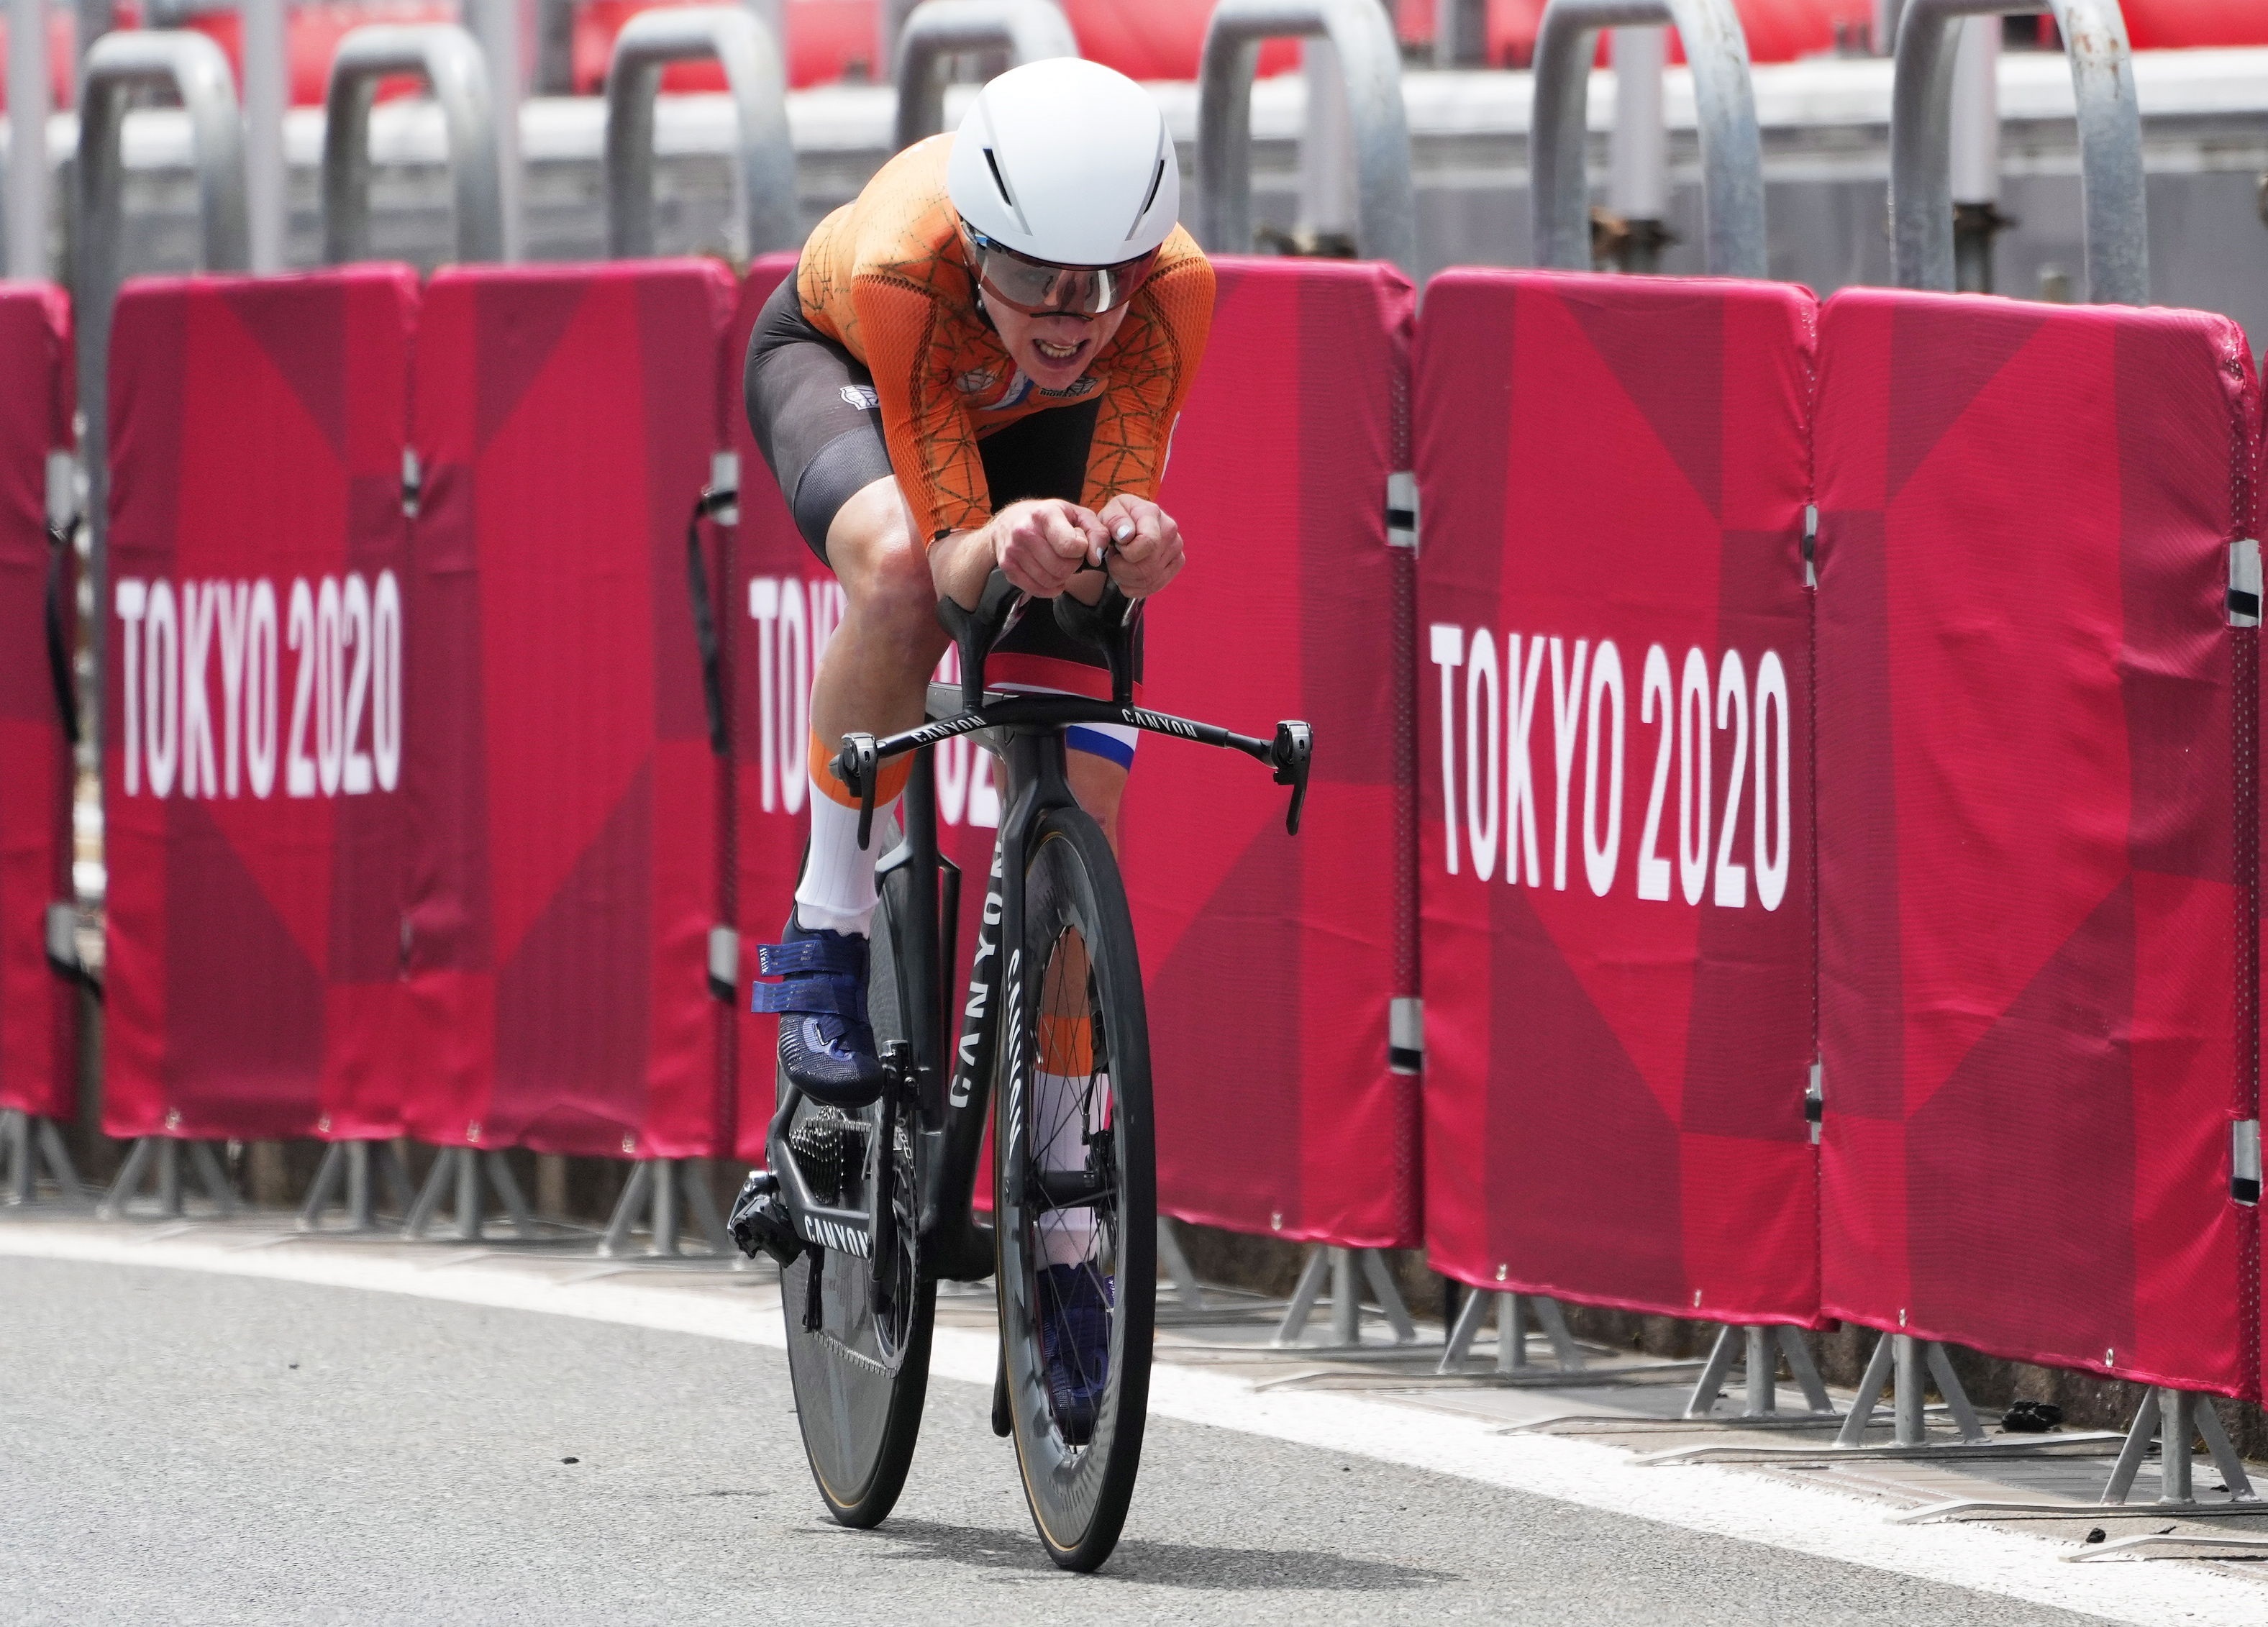 Annemiek van Vleuten of the Netherlands on her way to winning gold in the women's road cycling time trial at the Tokyo 2020 Olympic Games at the Fuji International Speedway in Oyama, Japan, 28 July 2021. EFE/EPA/CHRISTOPHER JUE
